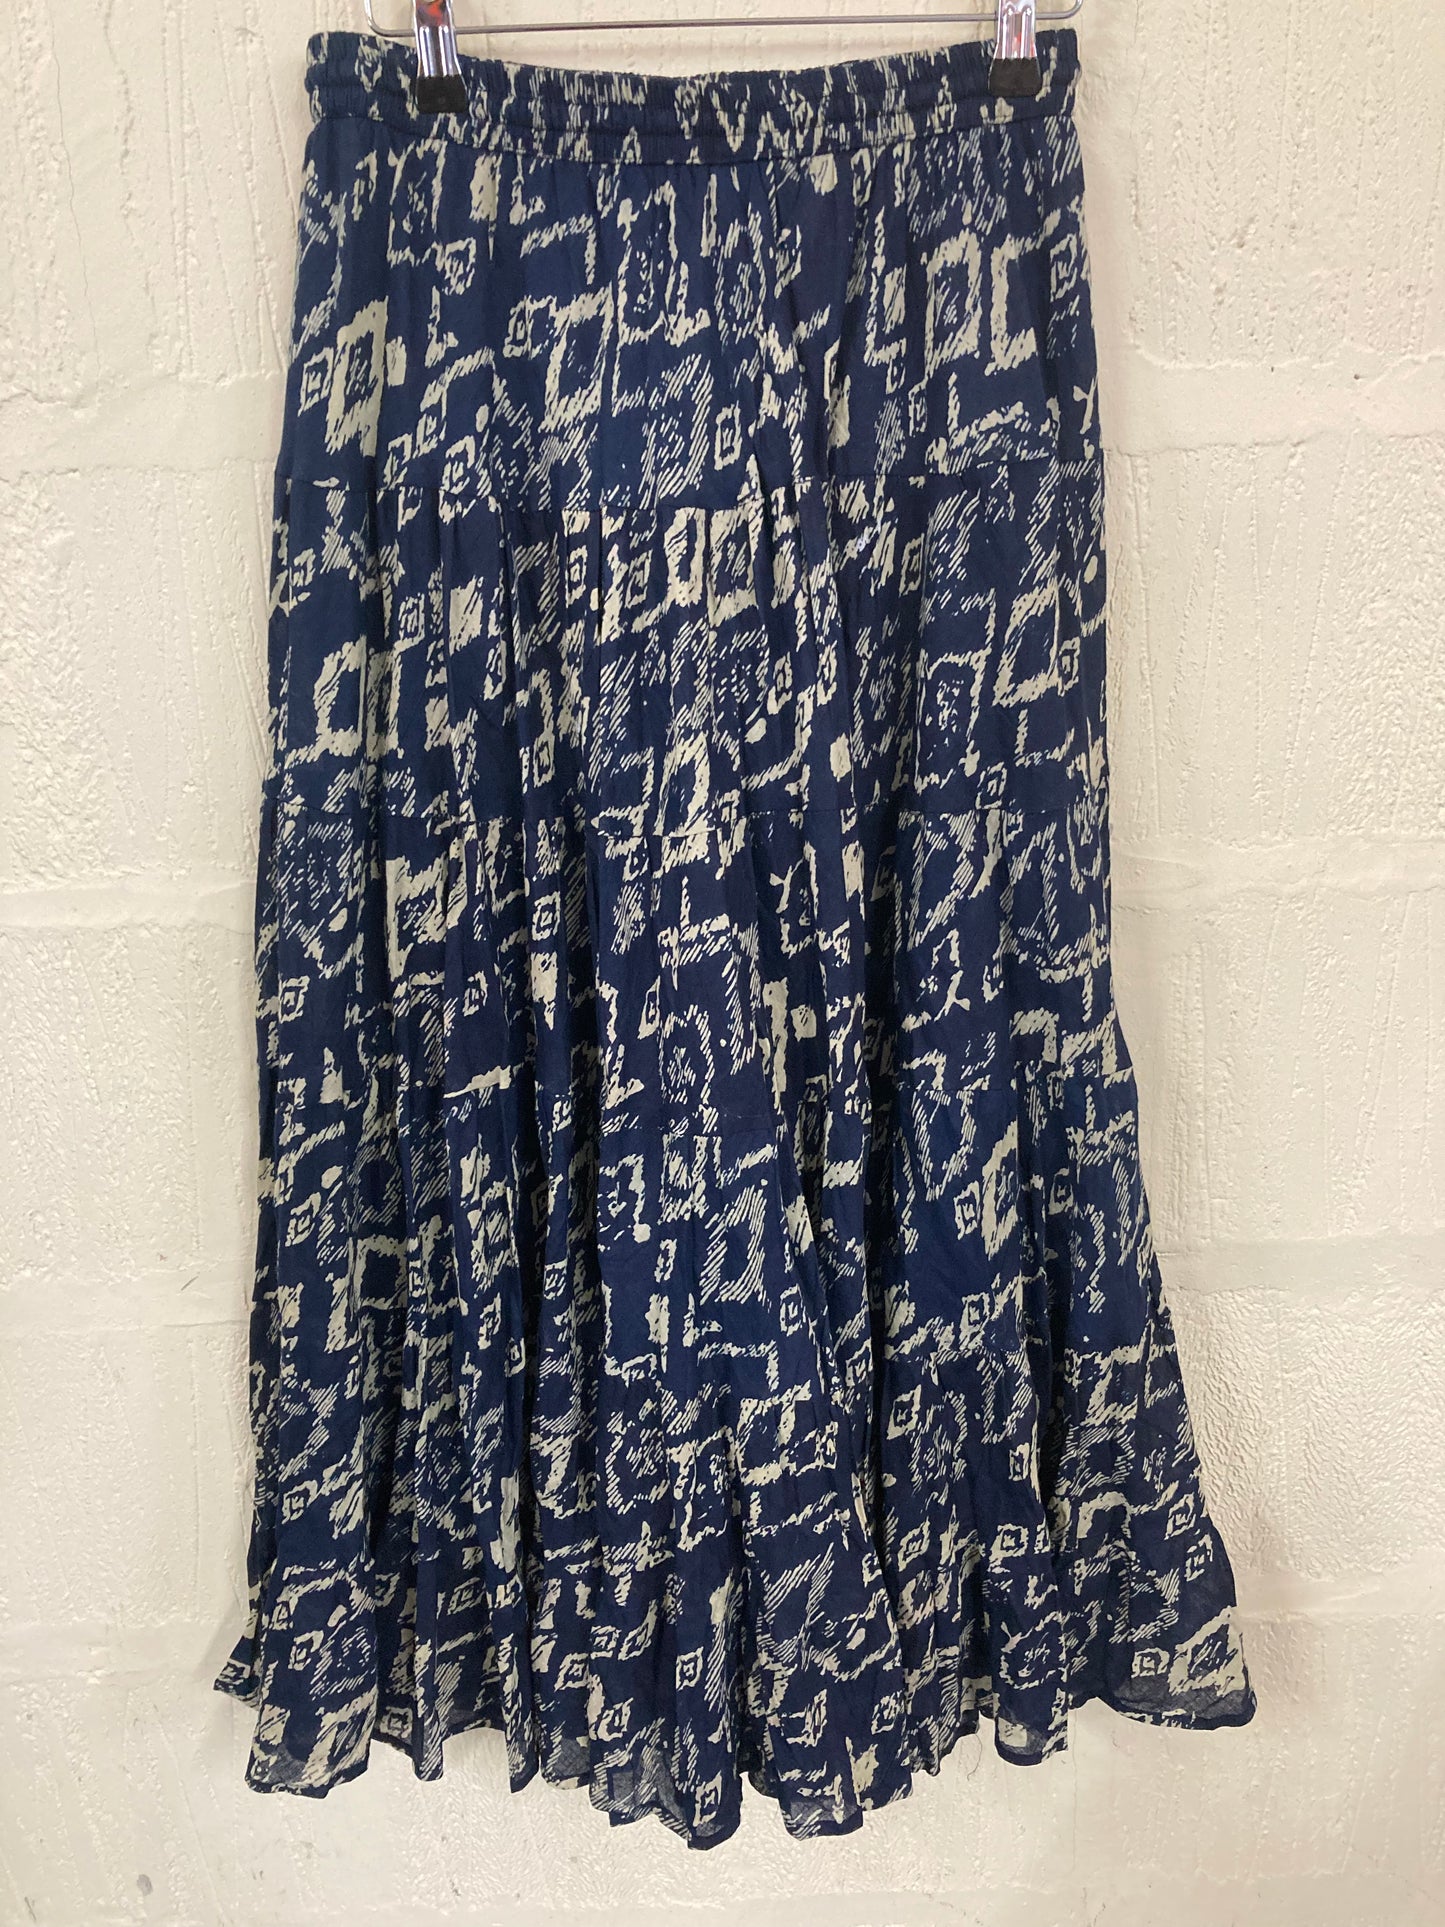 Vintage Navy and White Ikat Pattern Skirt 8